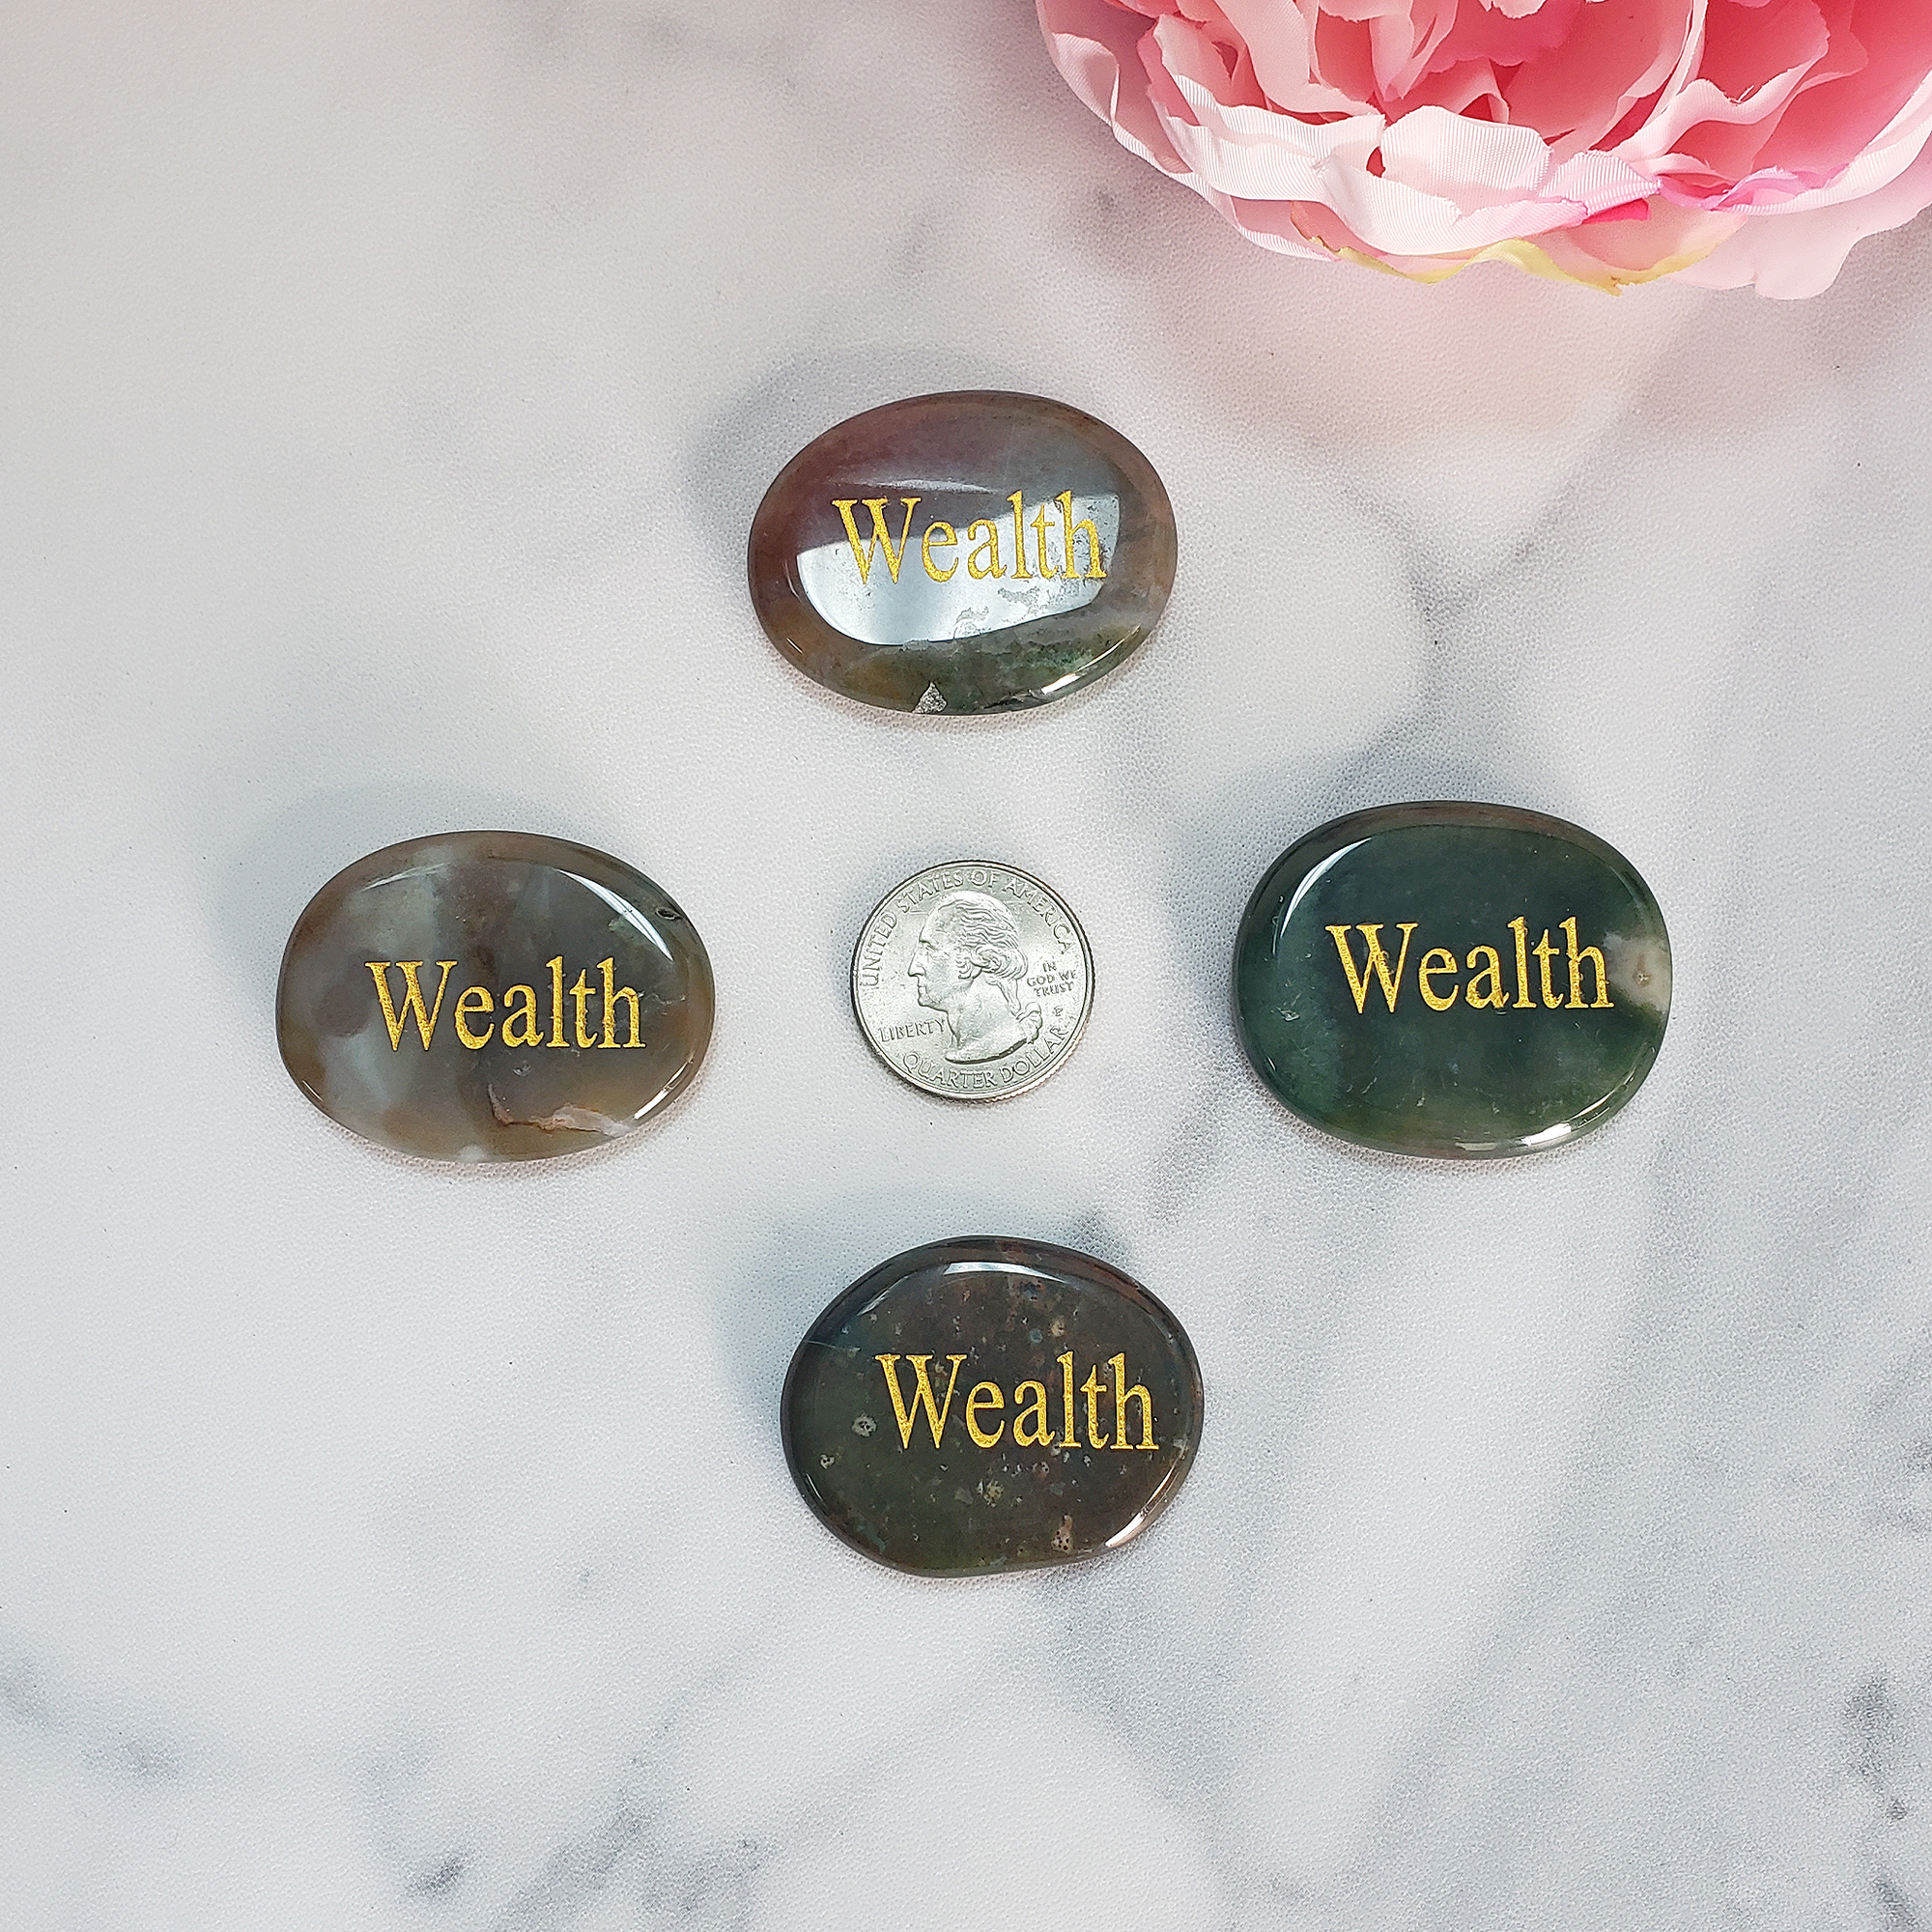 Wealth Affirmation Palm Stone | Crystal Worry Stone with "Wealth" Engraving - Size Comparison